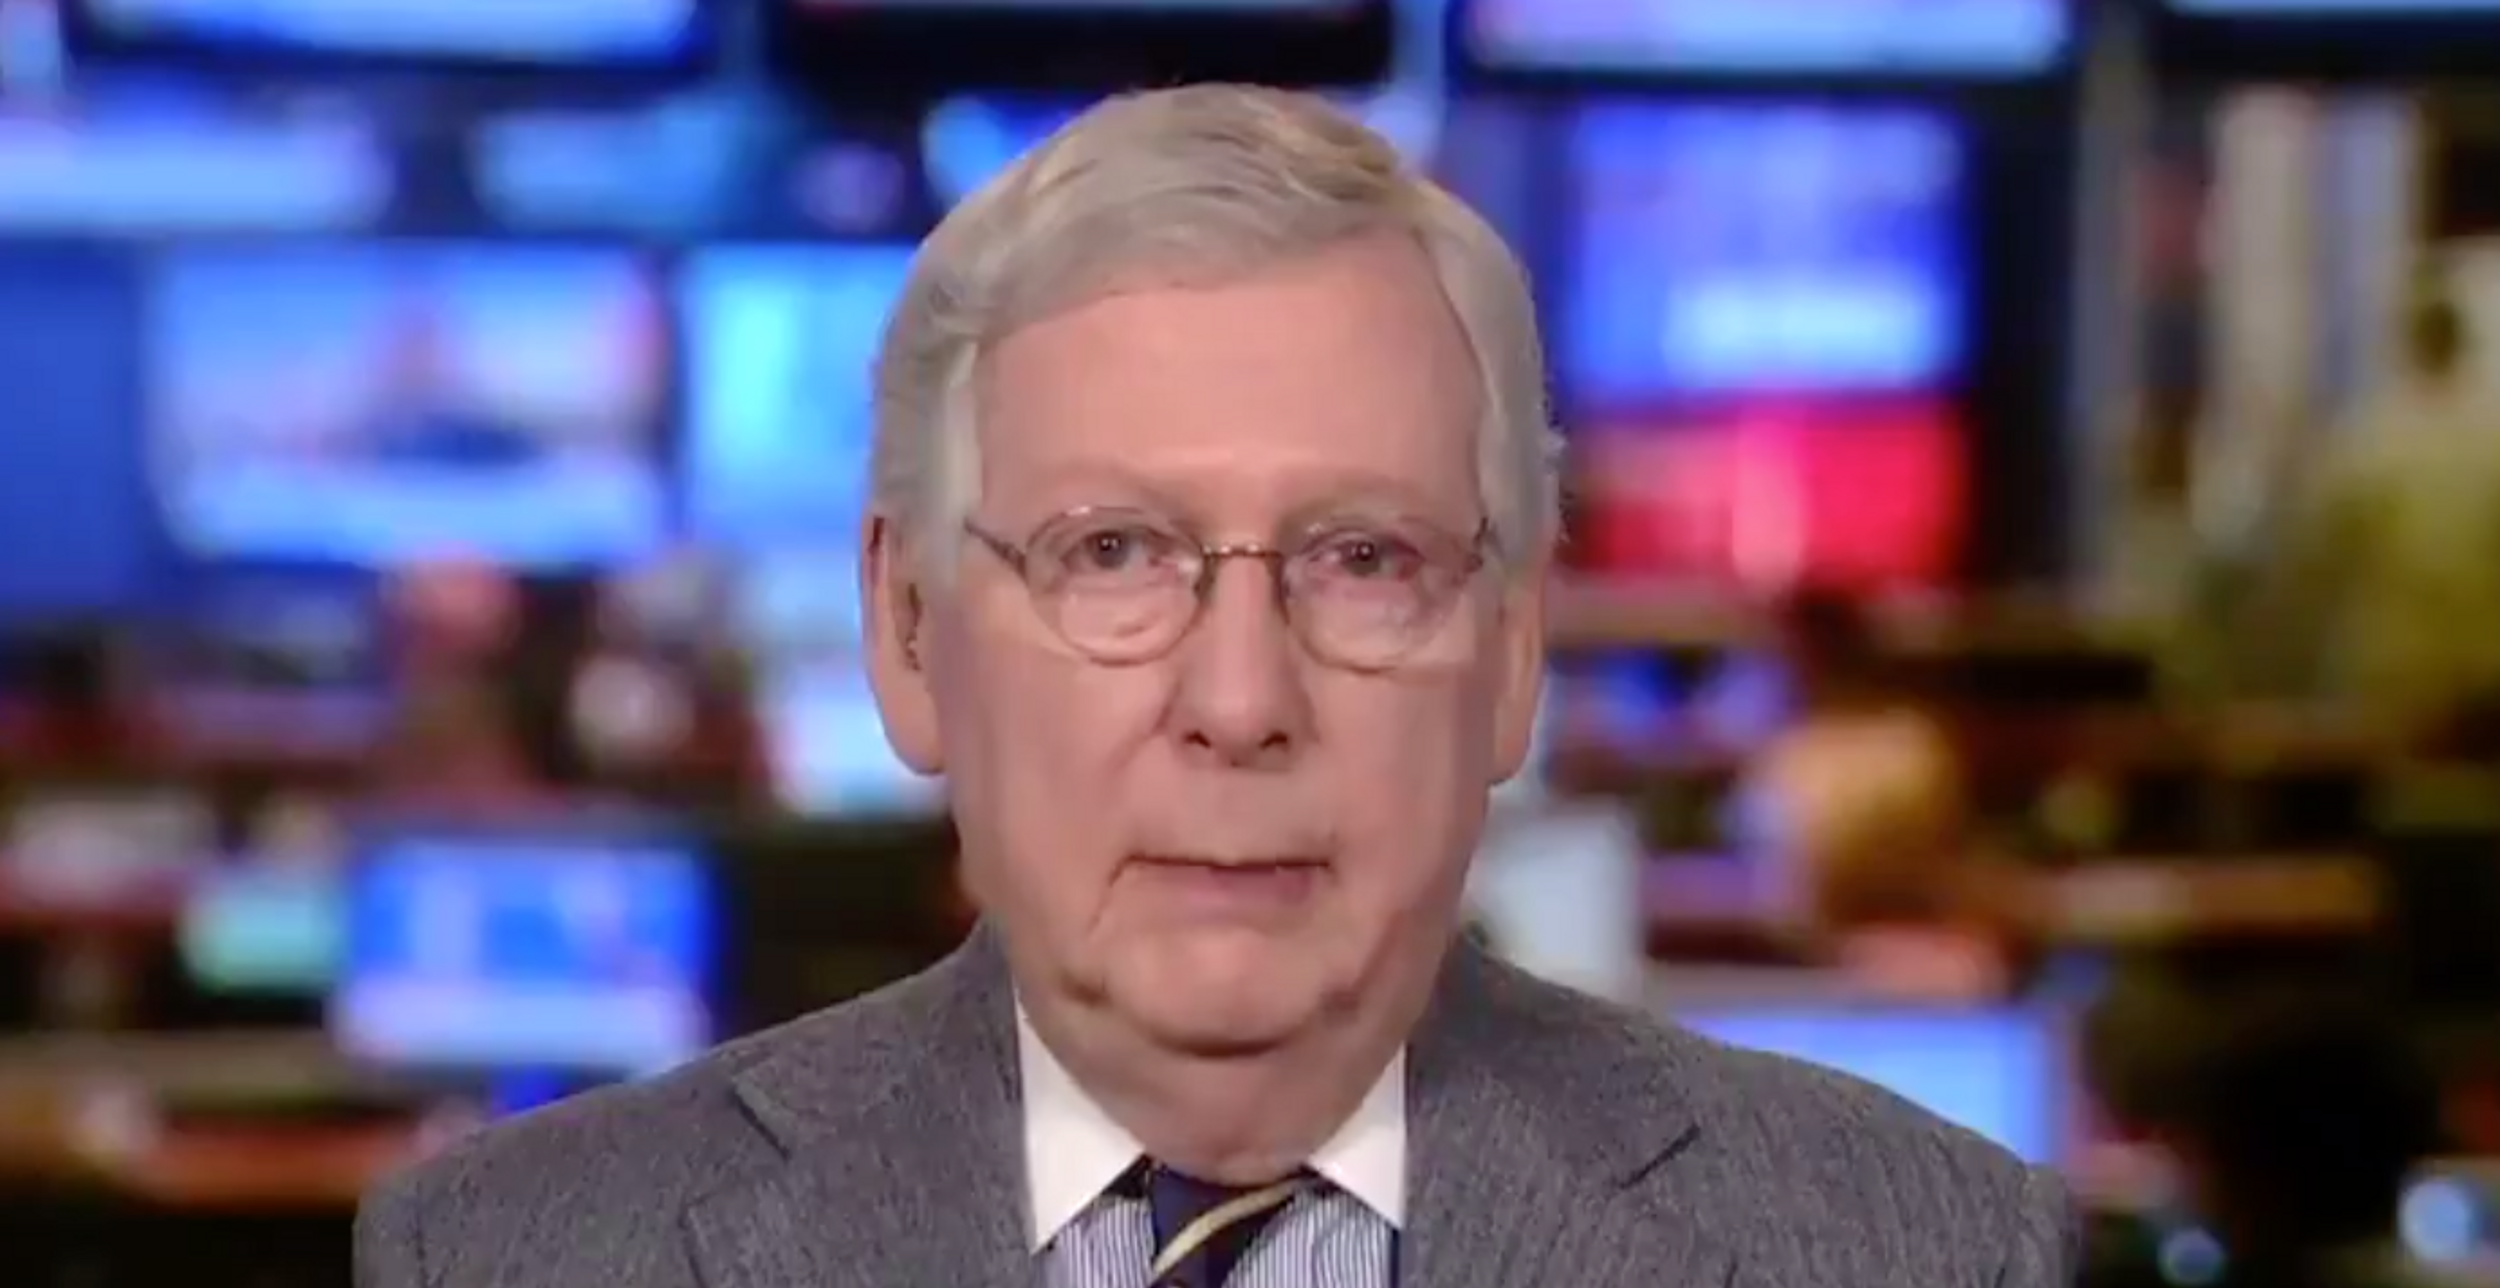 Mitch McConnell Admitted He's 'Coordinating' Impeachment Strategy With Trump's White House Counsel, and People Are Crying Foul